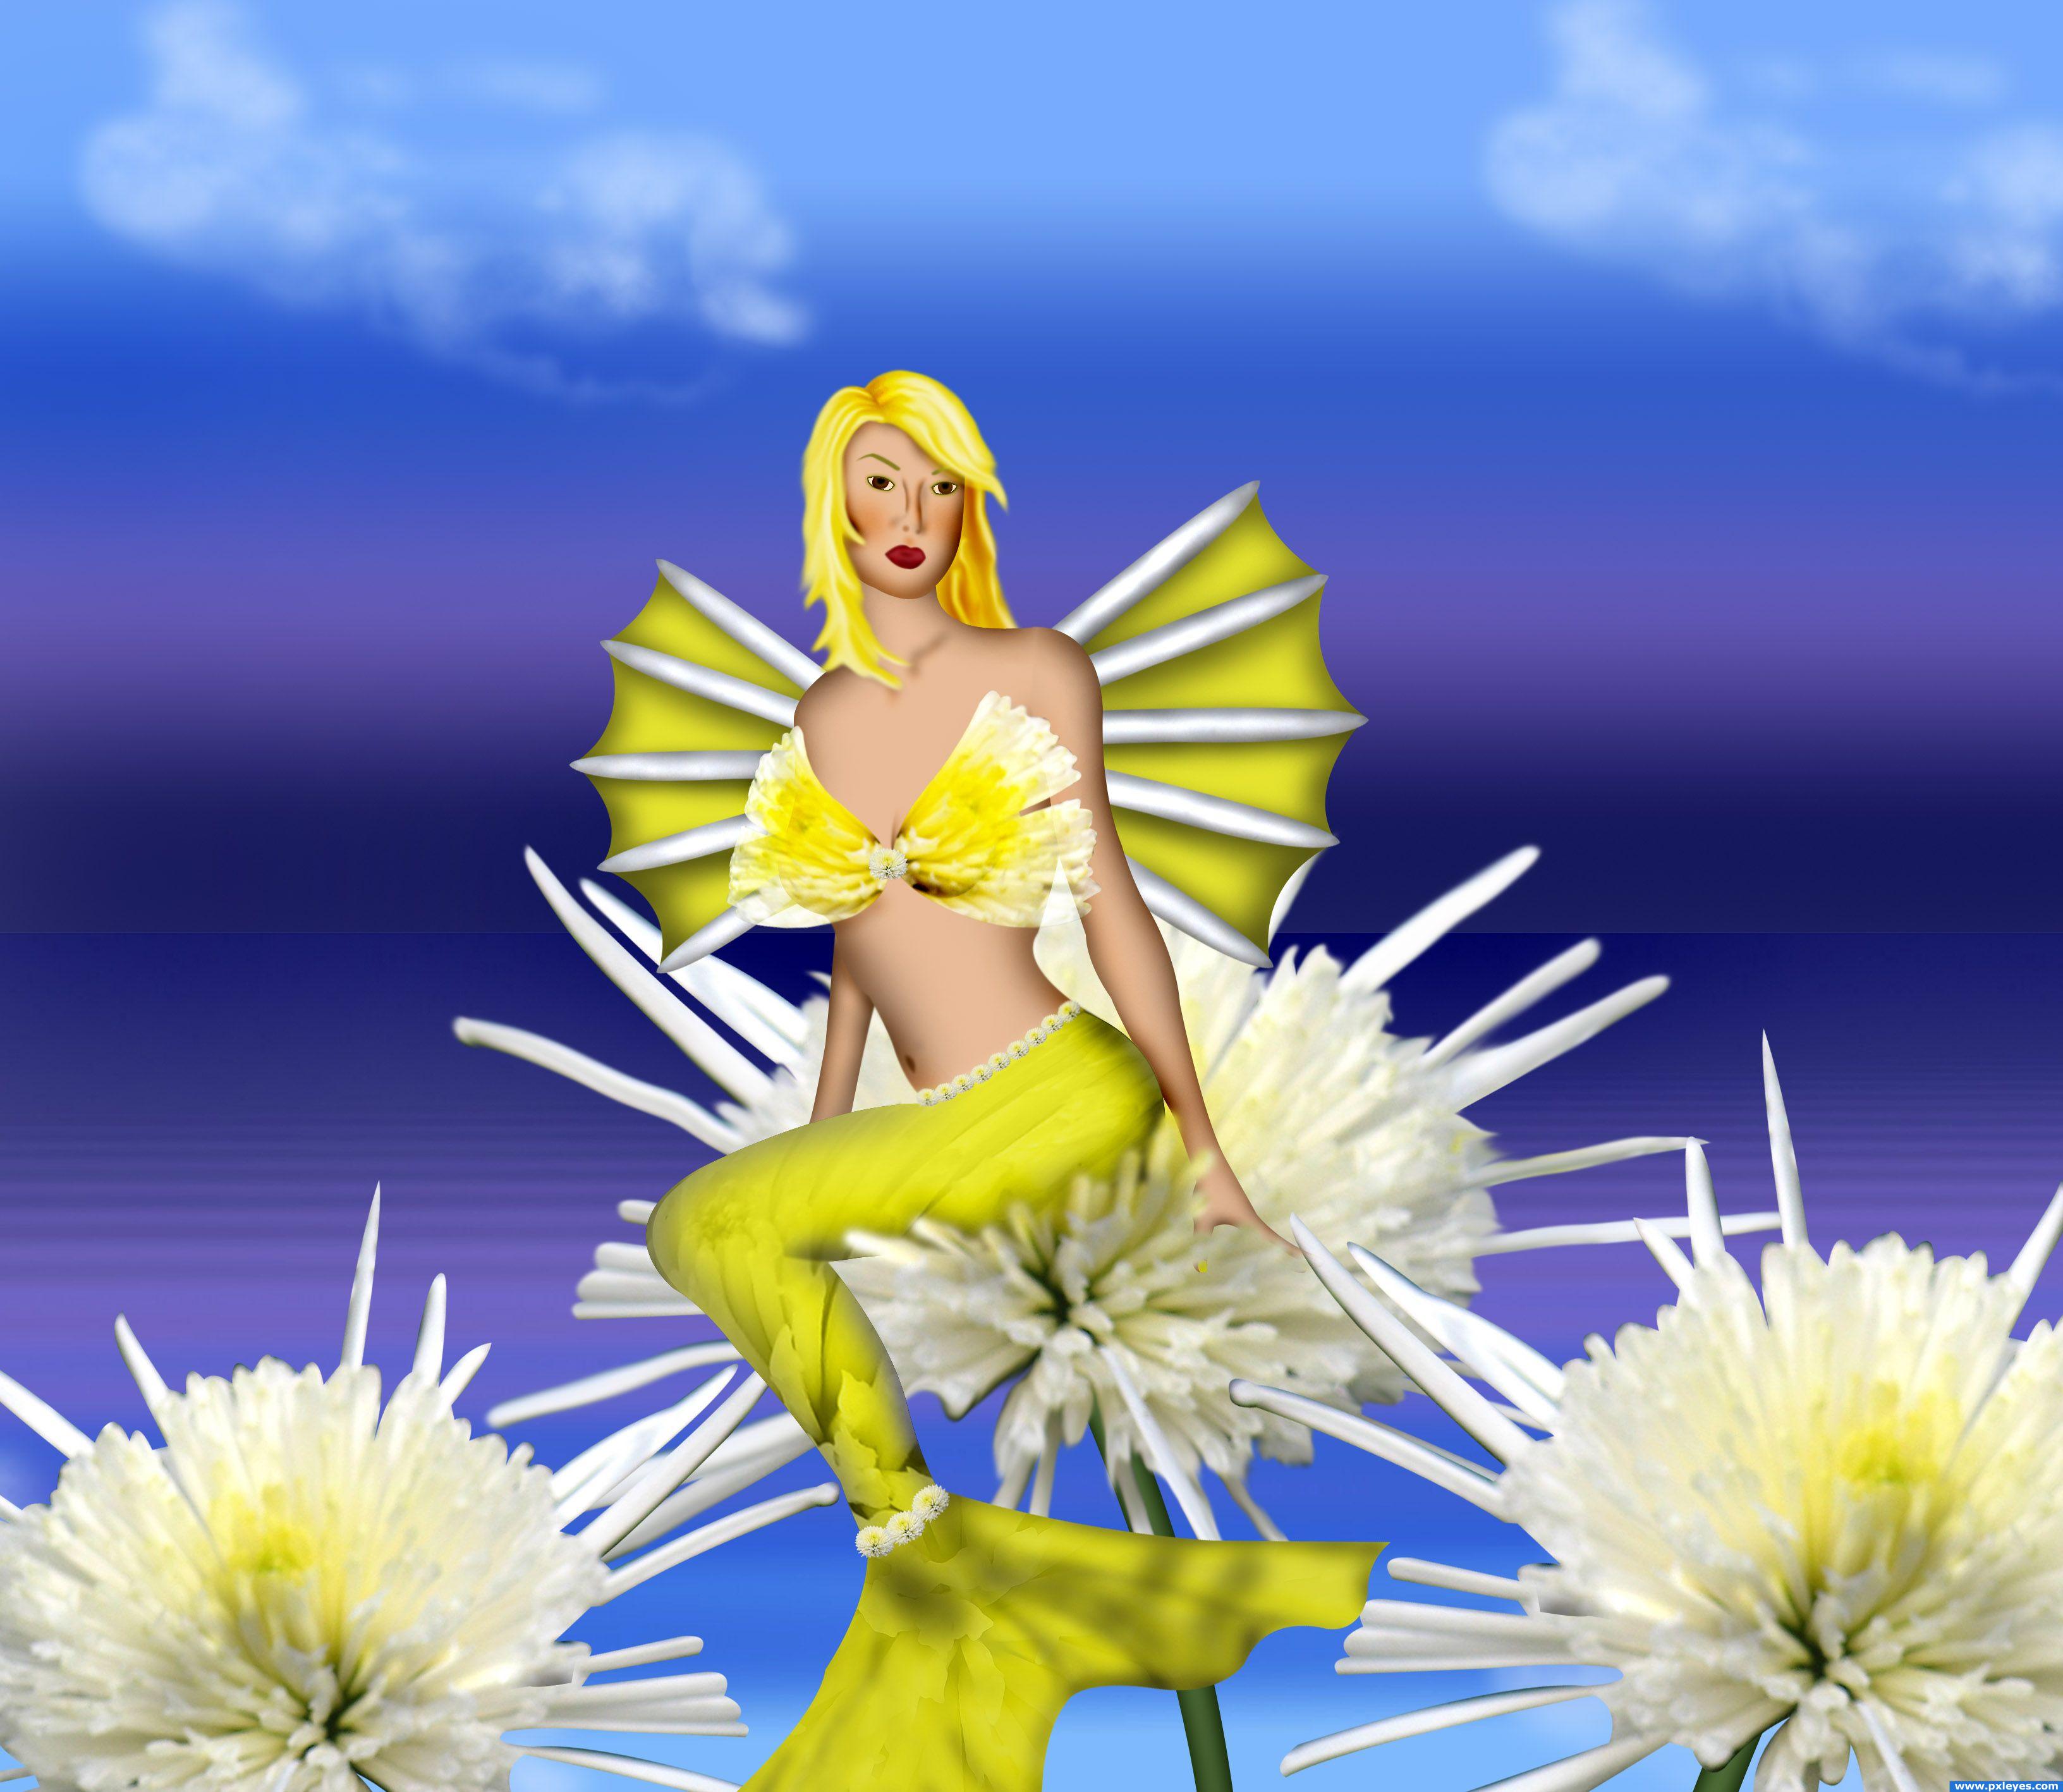 mermaid-picture-by-chakra1985-for-chrysanthemums-photoshop-contest